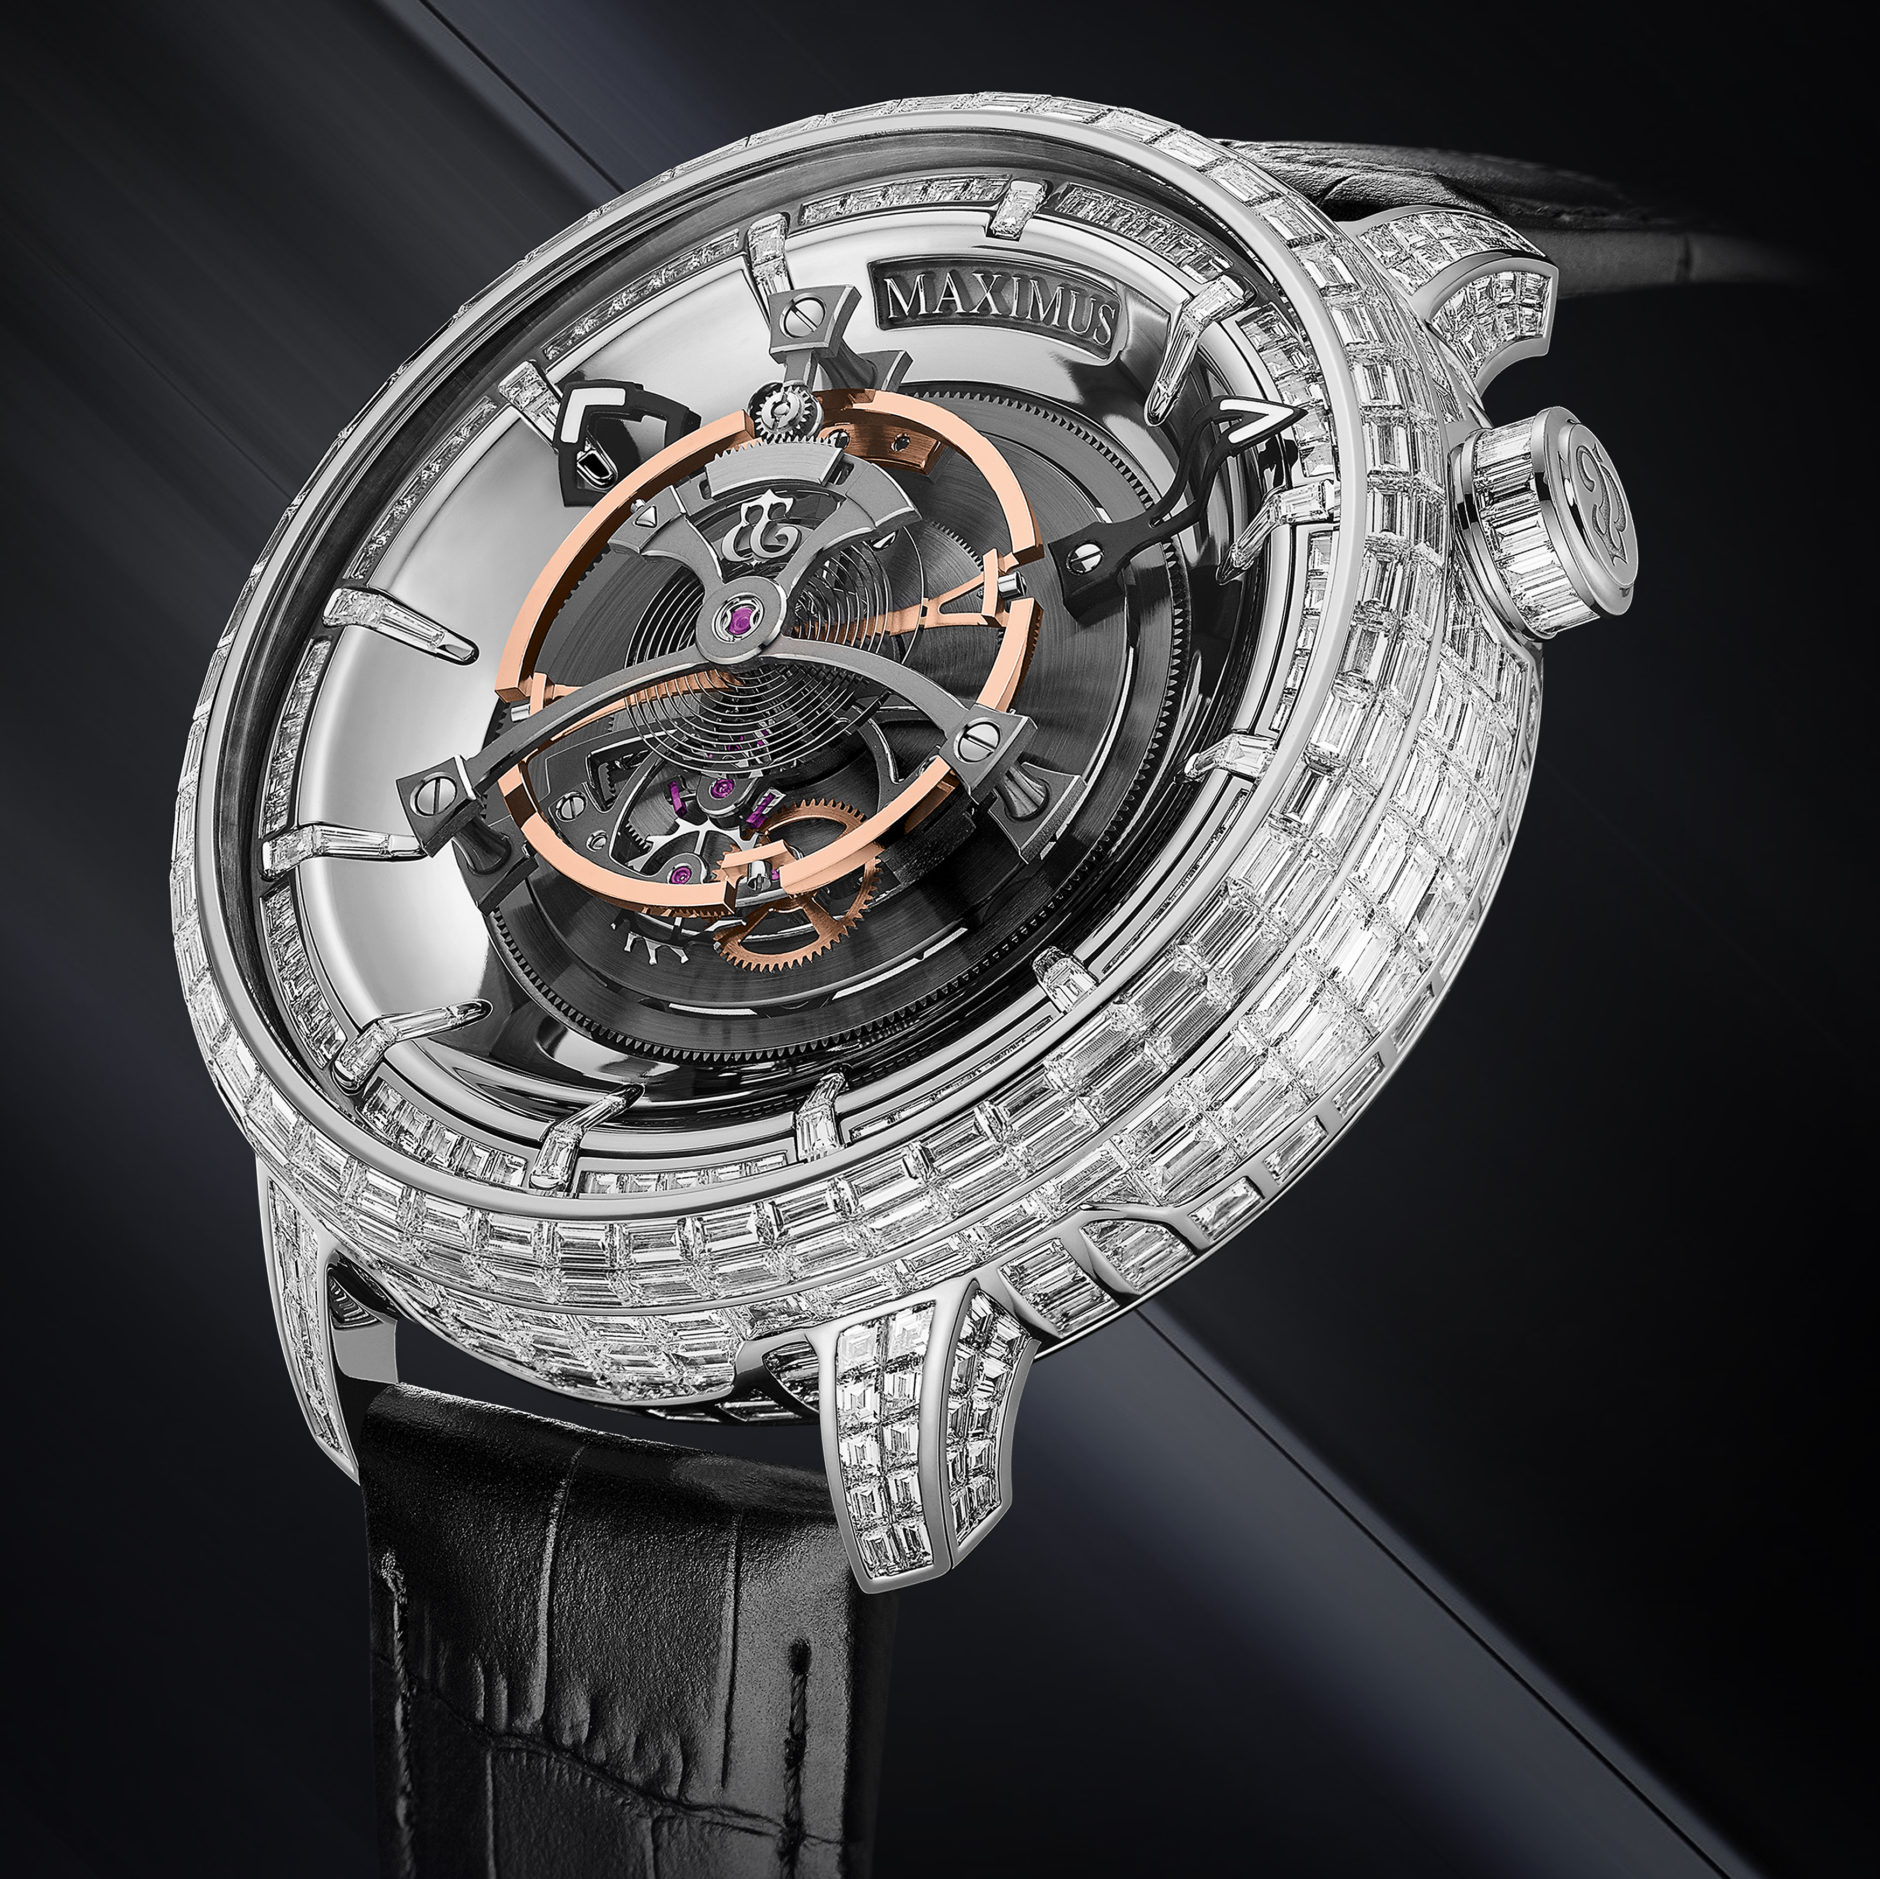 The World’s Largest Tourbillon Gets Updated in the Kerbedanz Maximus ...